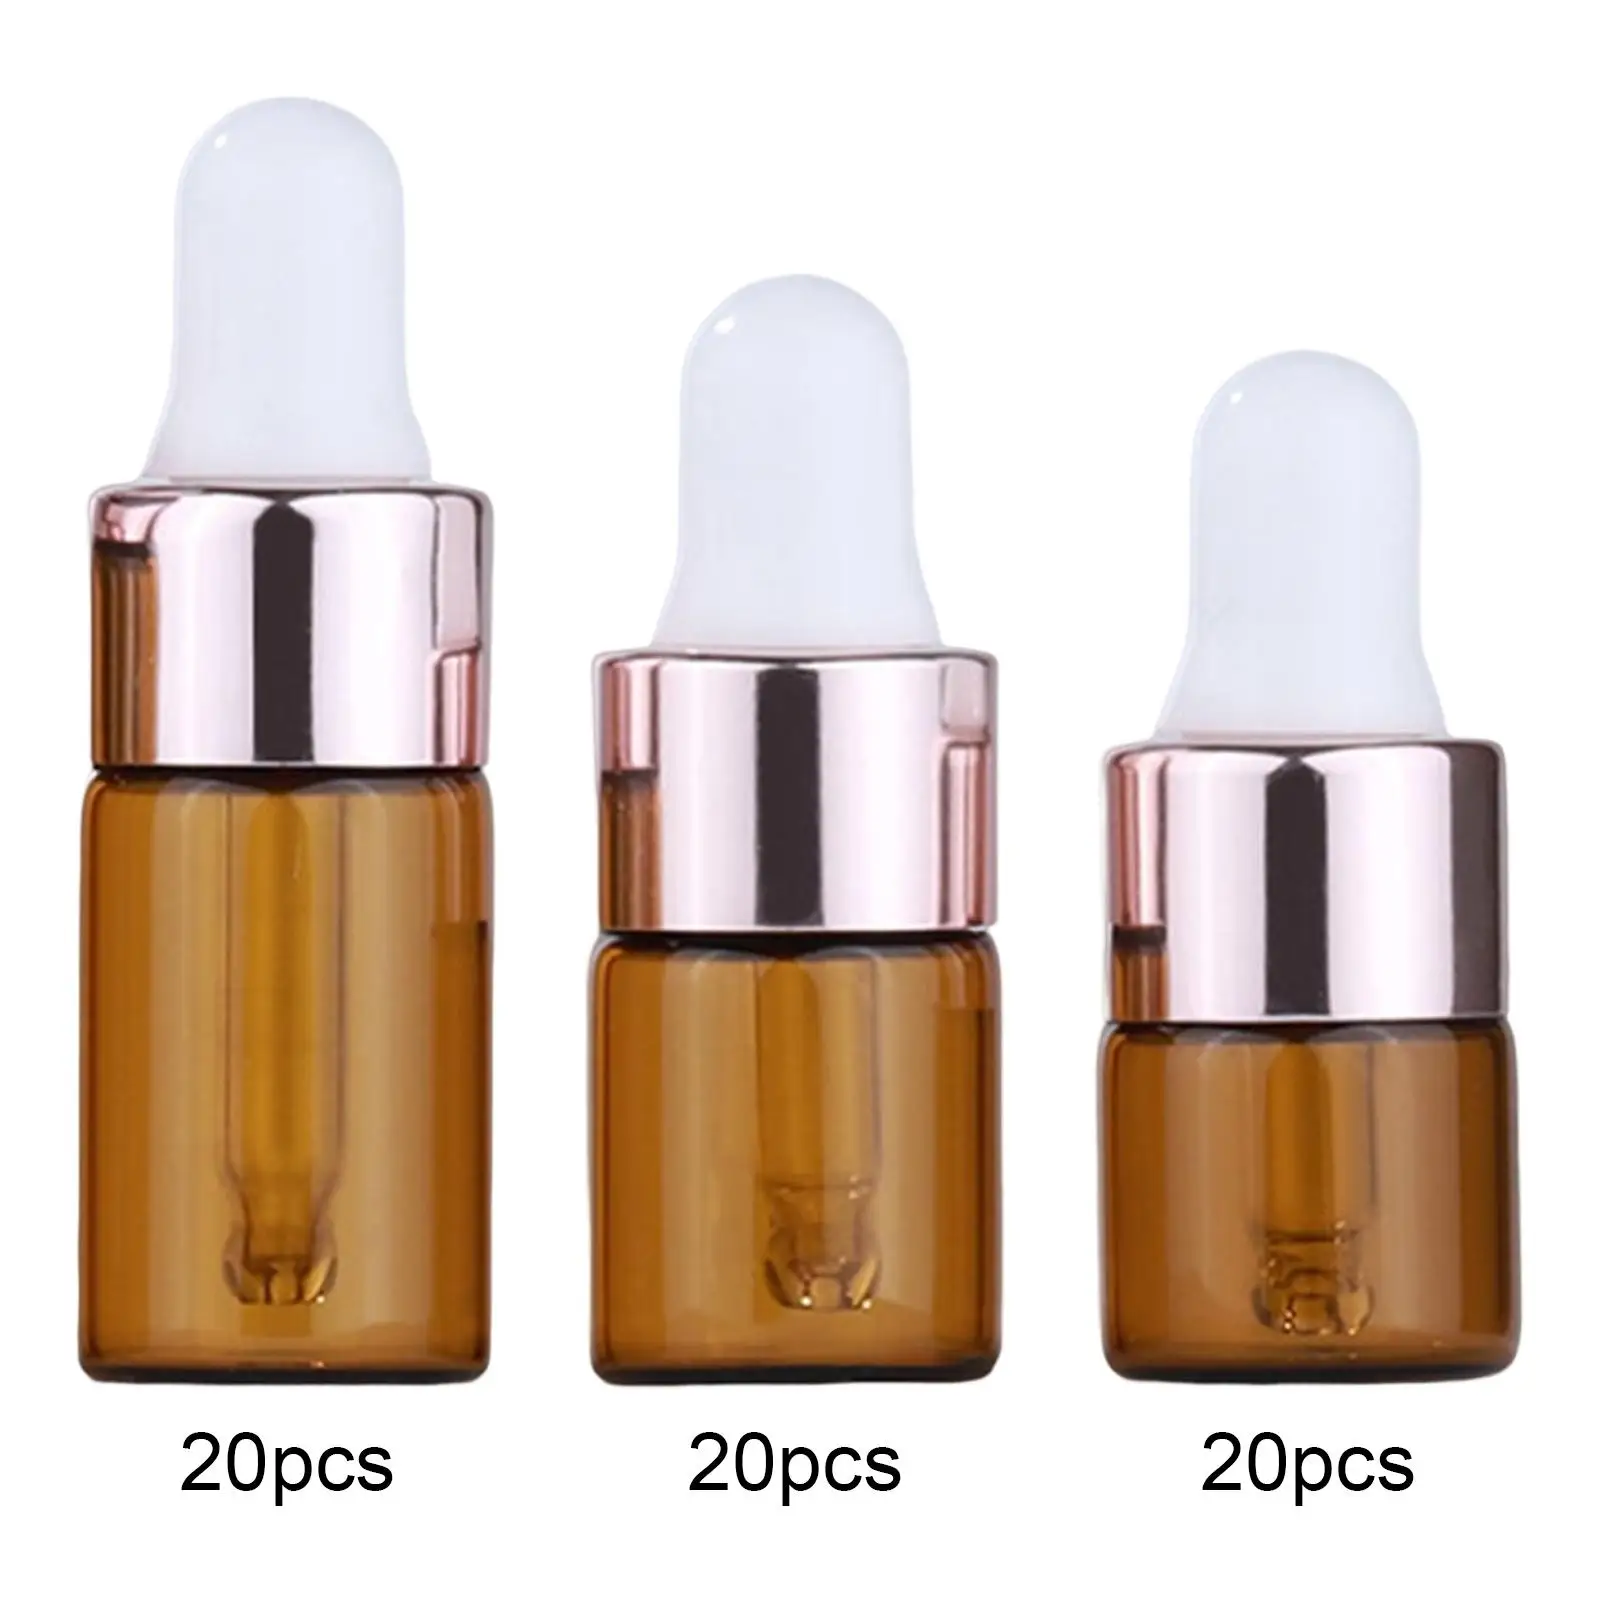 20x Essential Oil Dropper Bottles Containers Travel Bottles Refillable with Glass Eye Droppers Vials for Essential Oil Cosmetic